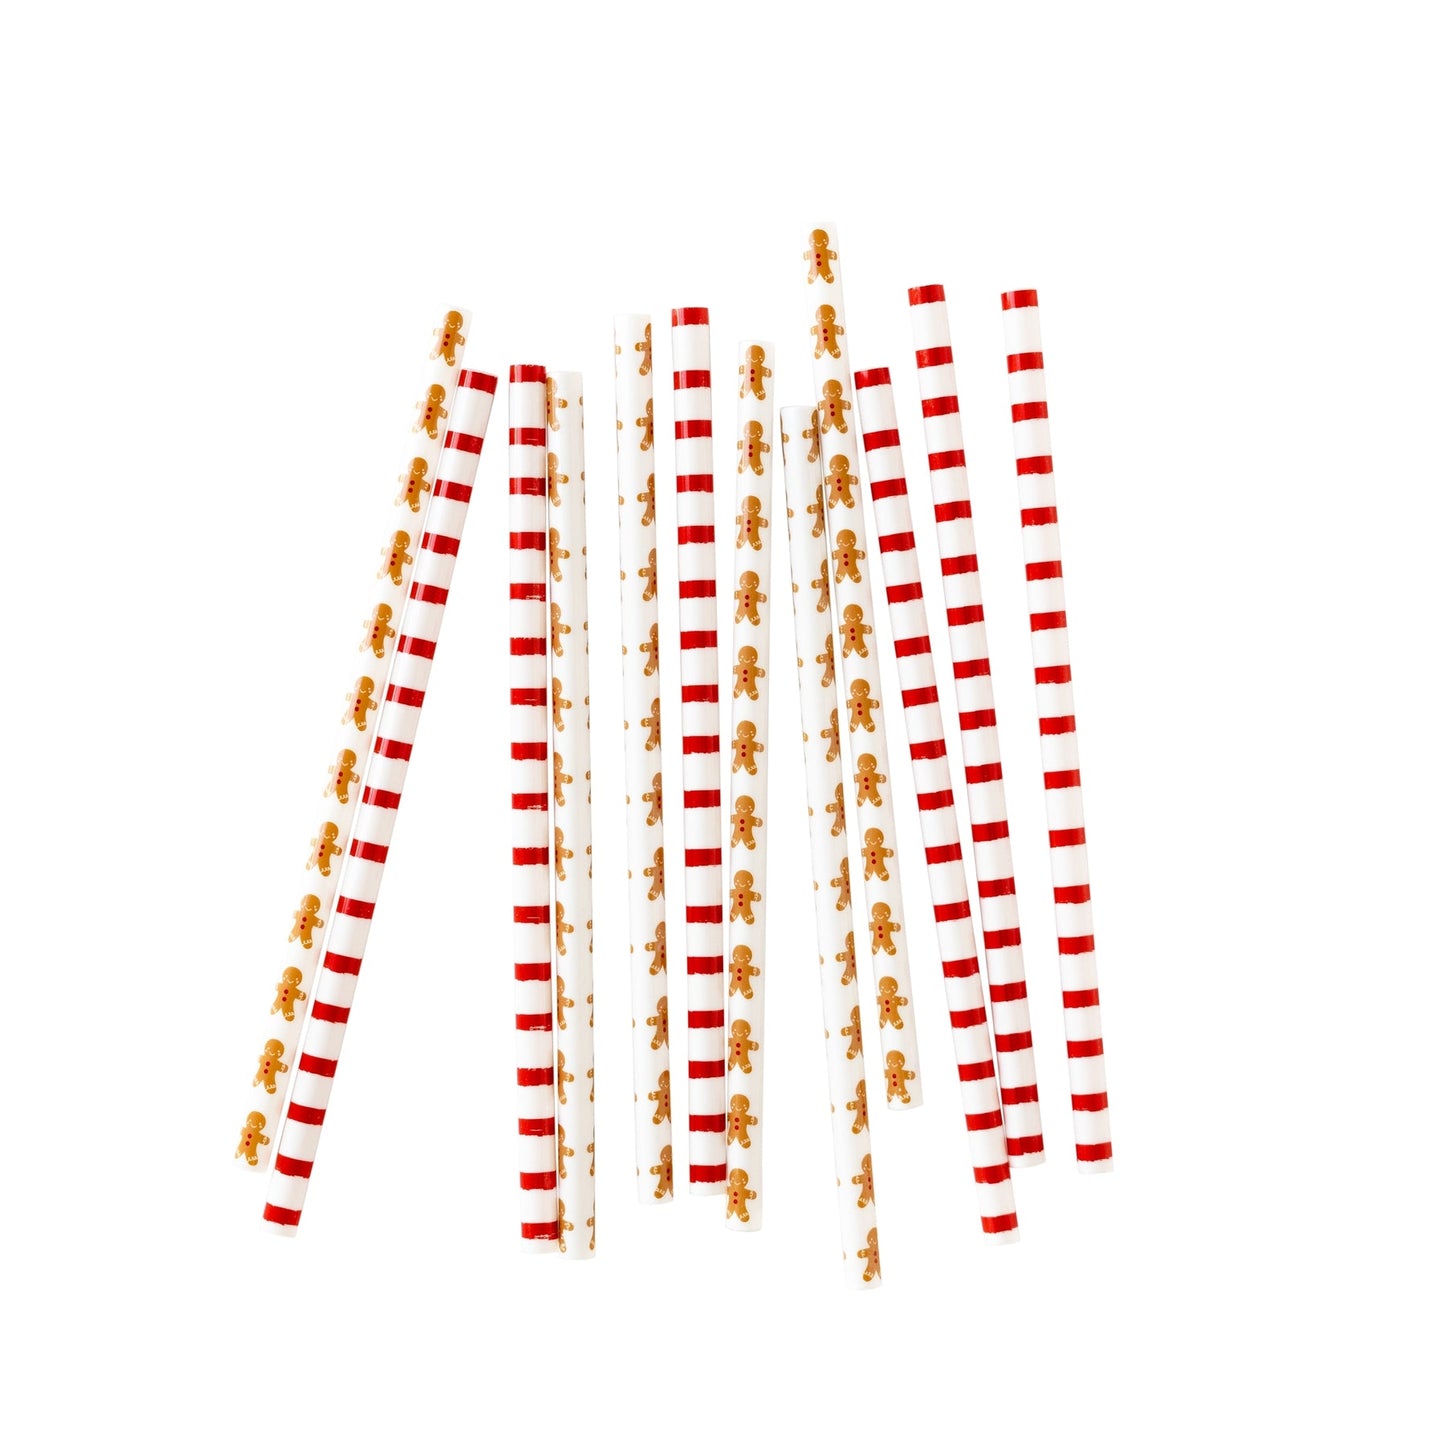 Gingerbread Reusable Straws - Favorite Little Things Co